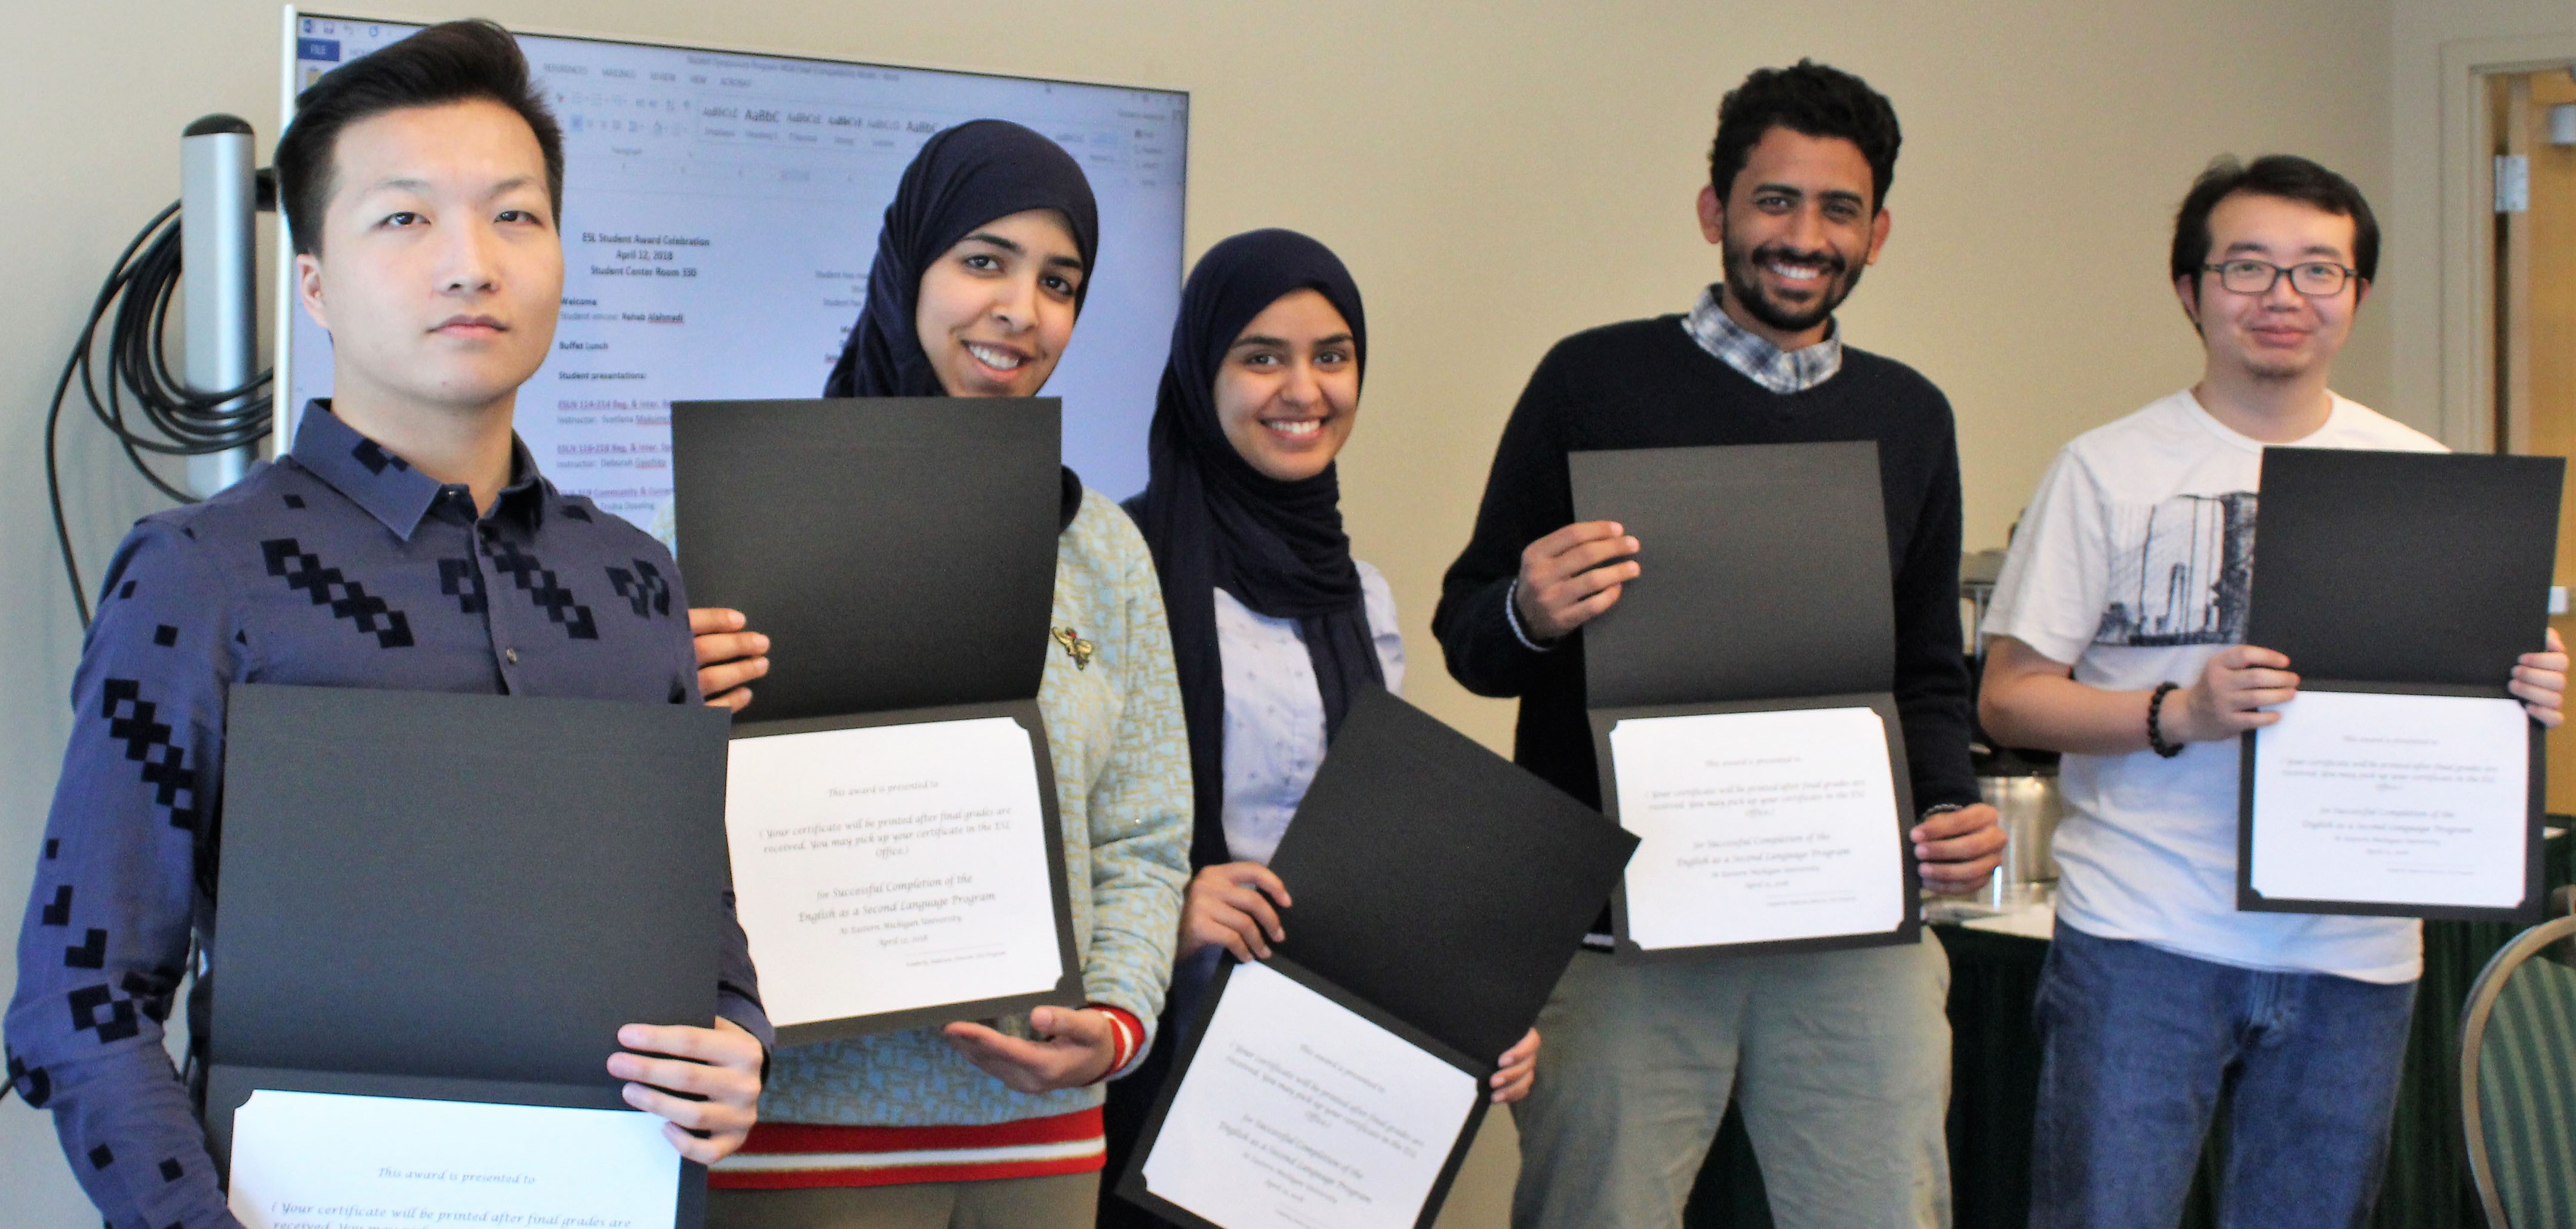 Five students stand with award certificates.